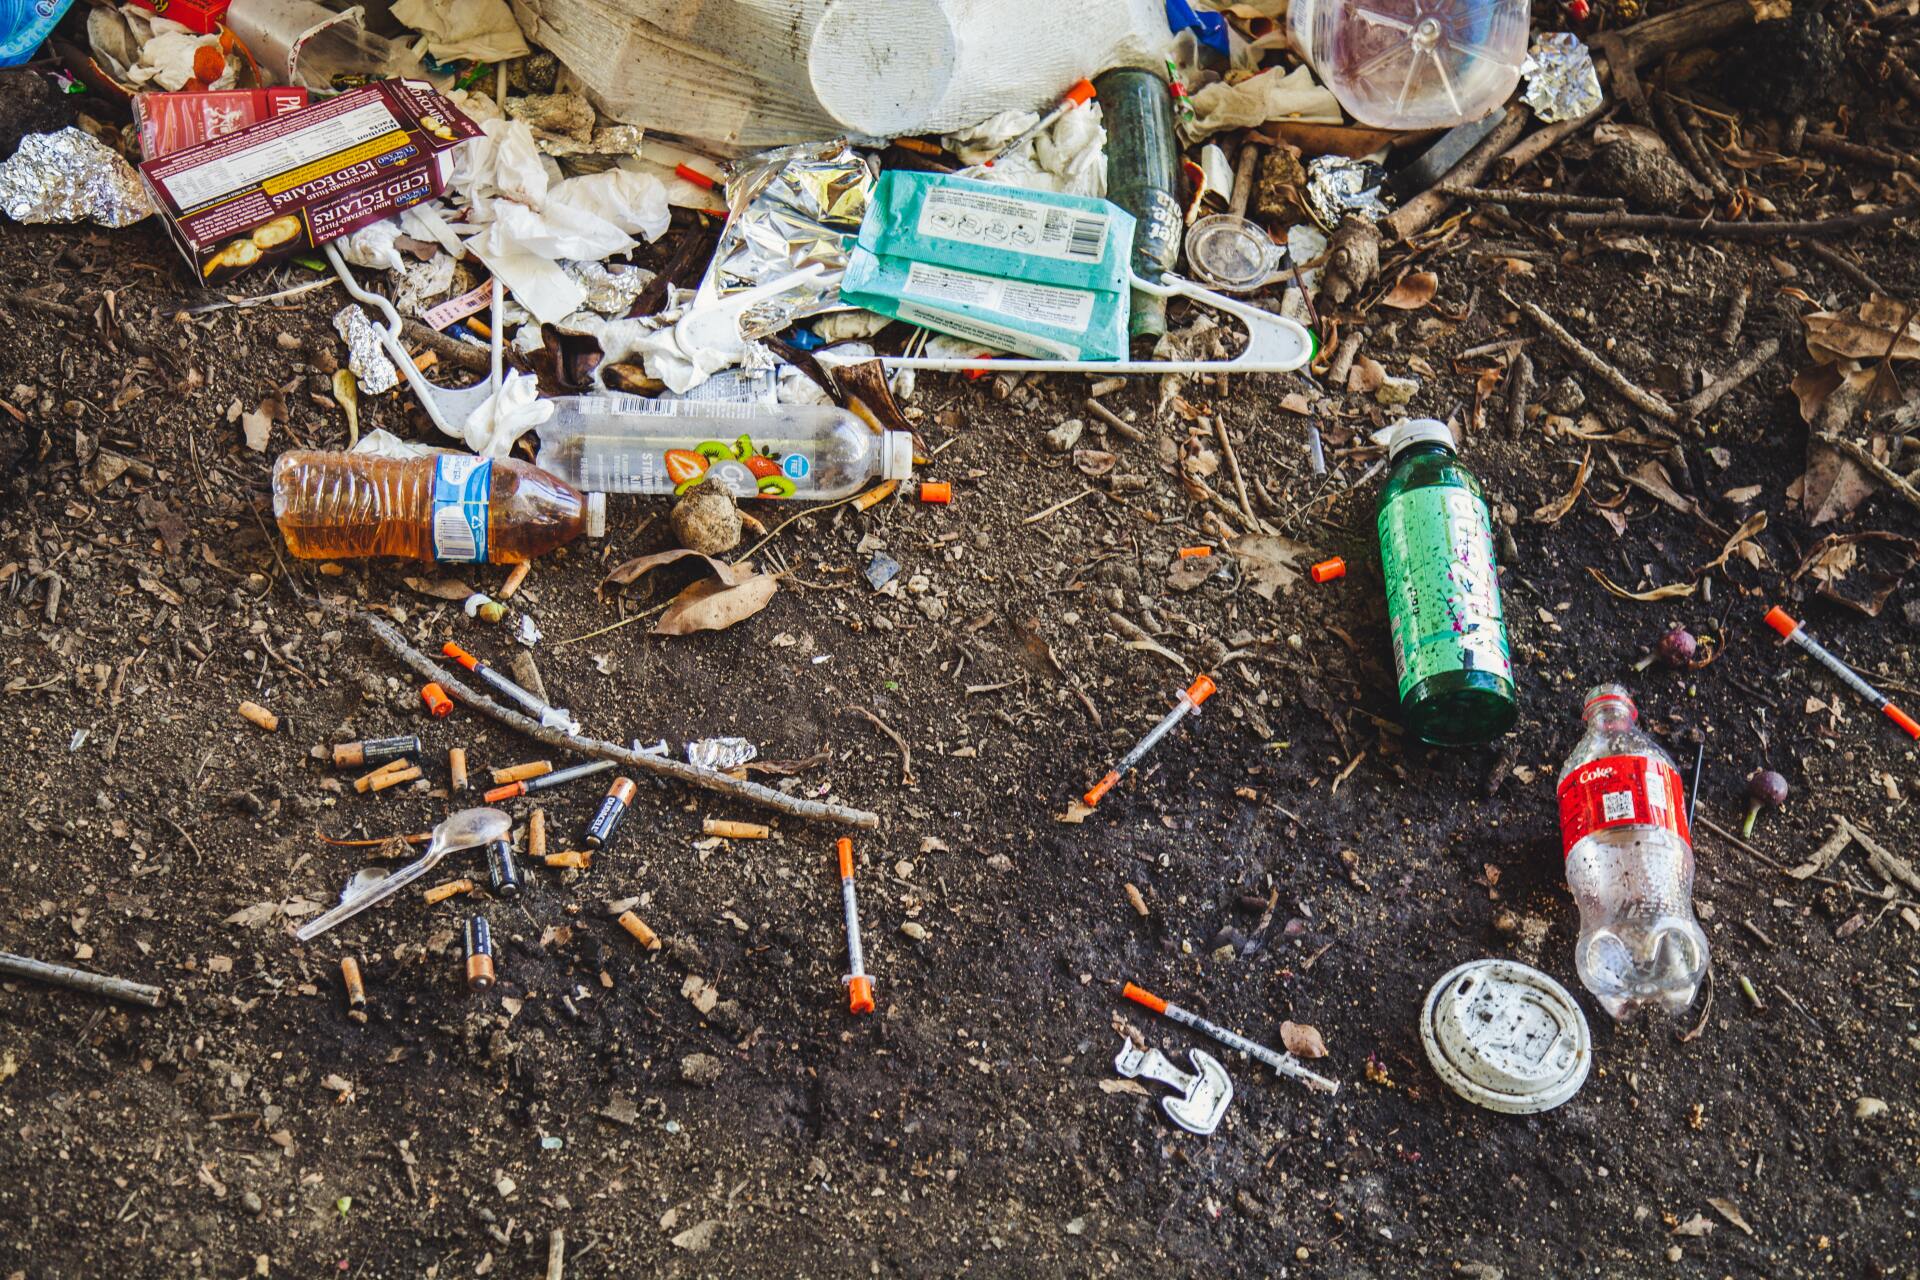 a bottle of coca cola sits in the middle of a pile of trash amongst needles and bodily fluids